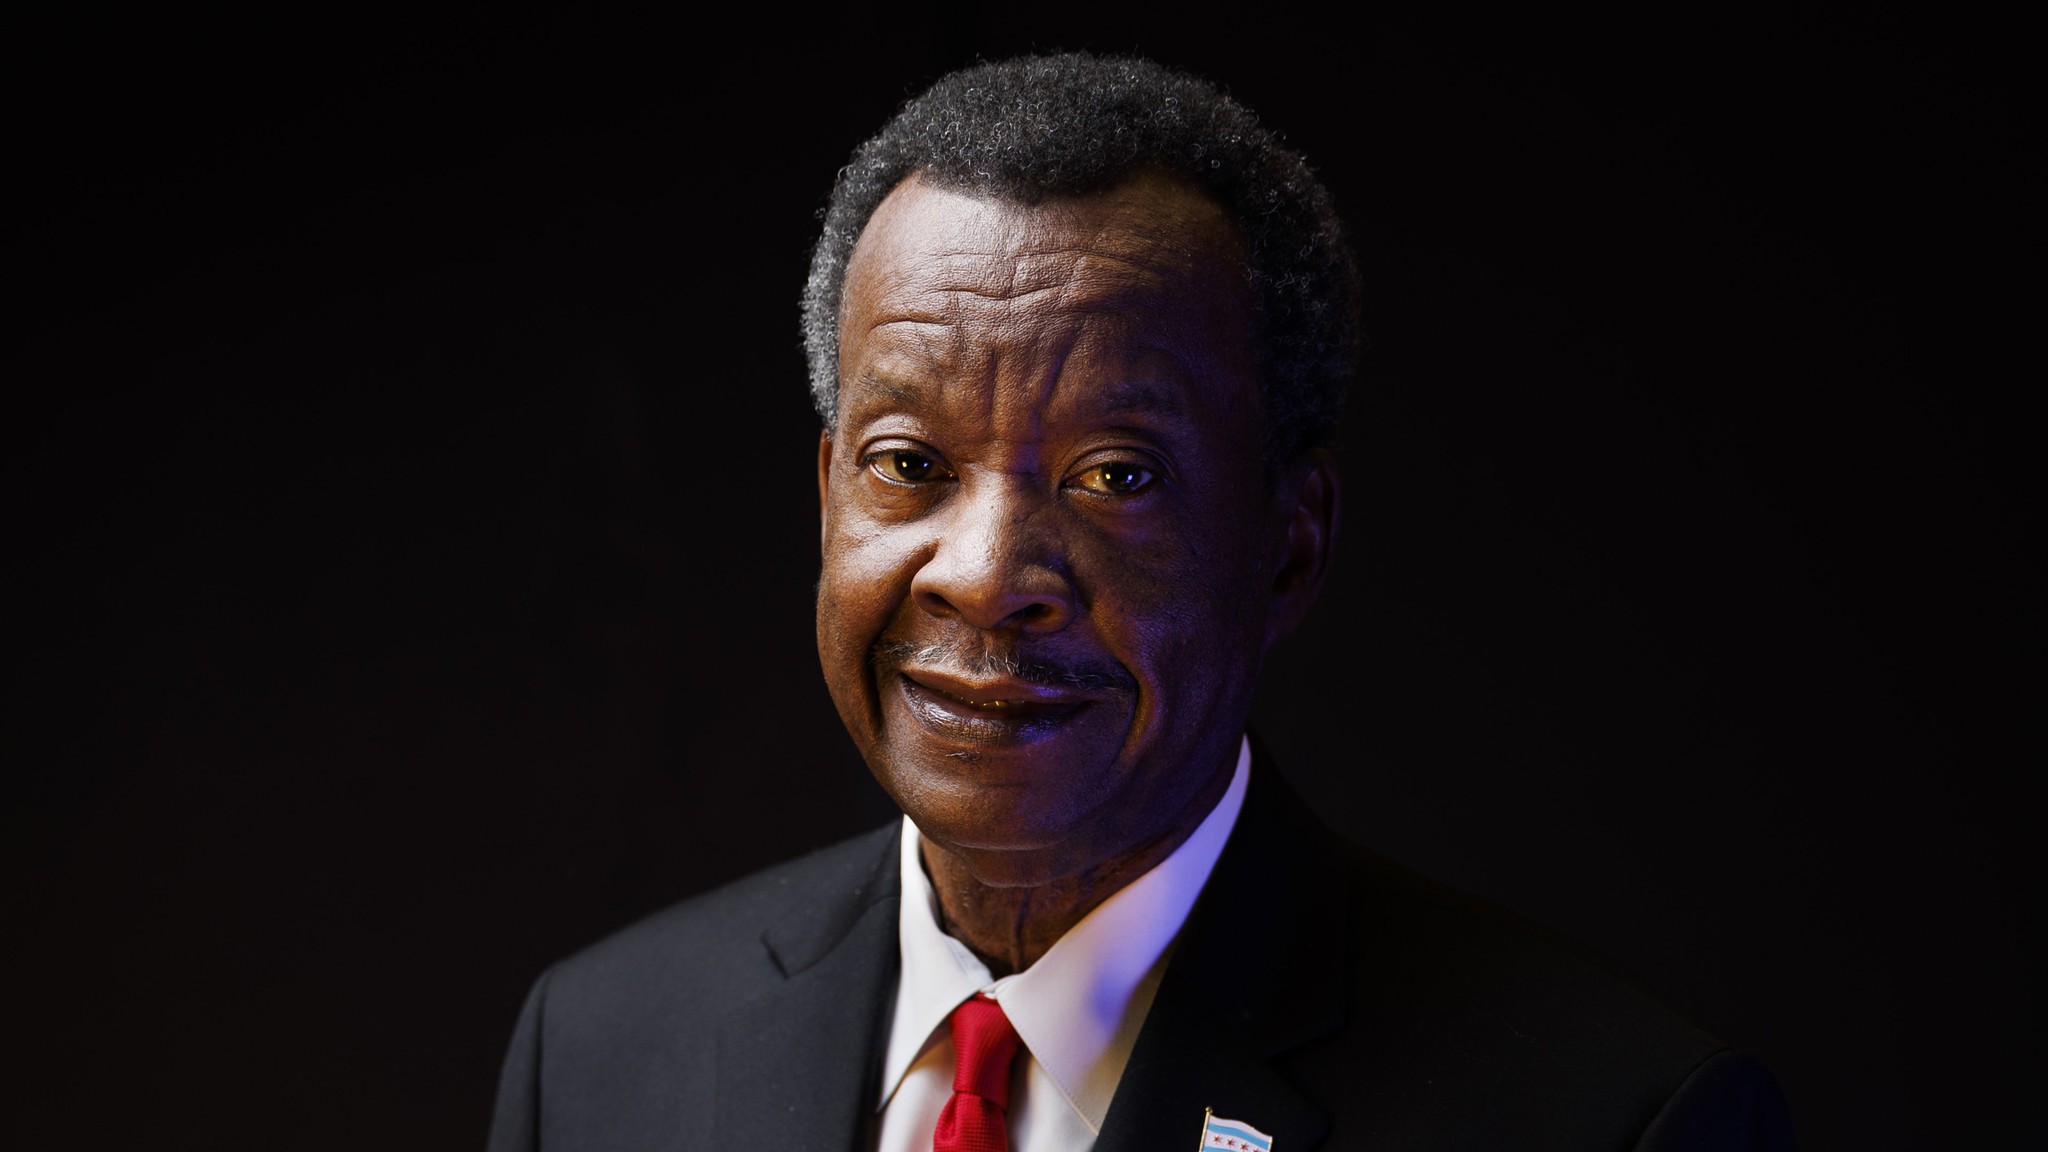 Mayoral challenger Willie Wilson takes aim at violent crime - Chicago  Sun-Times